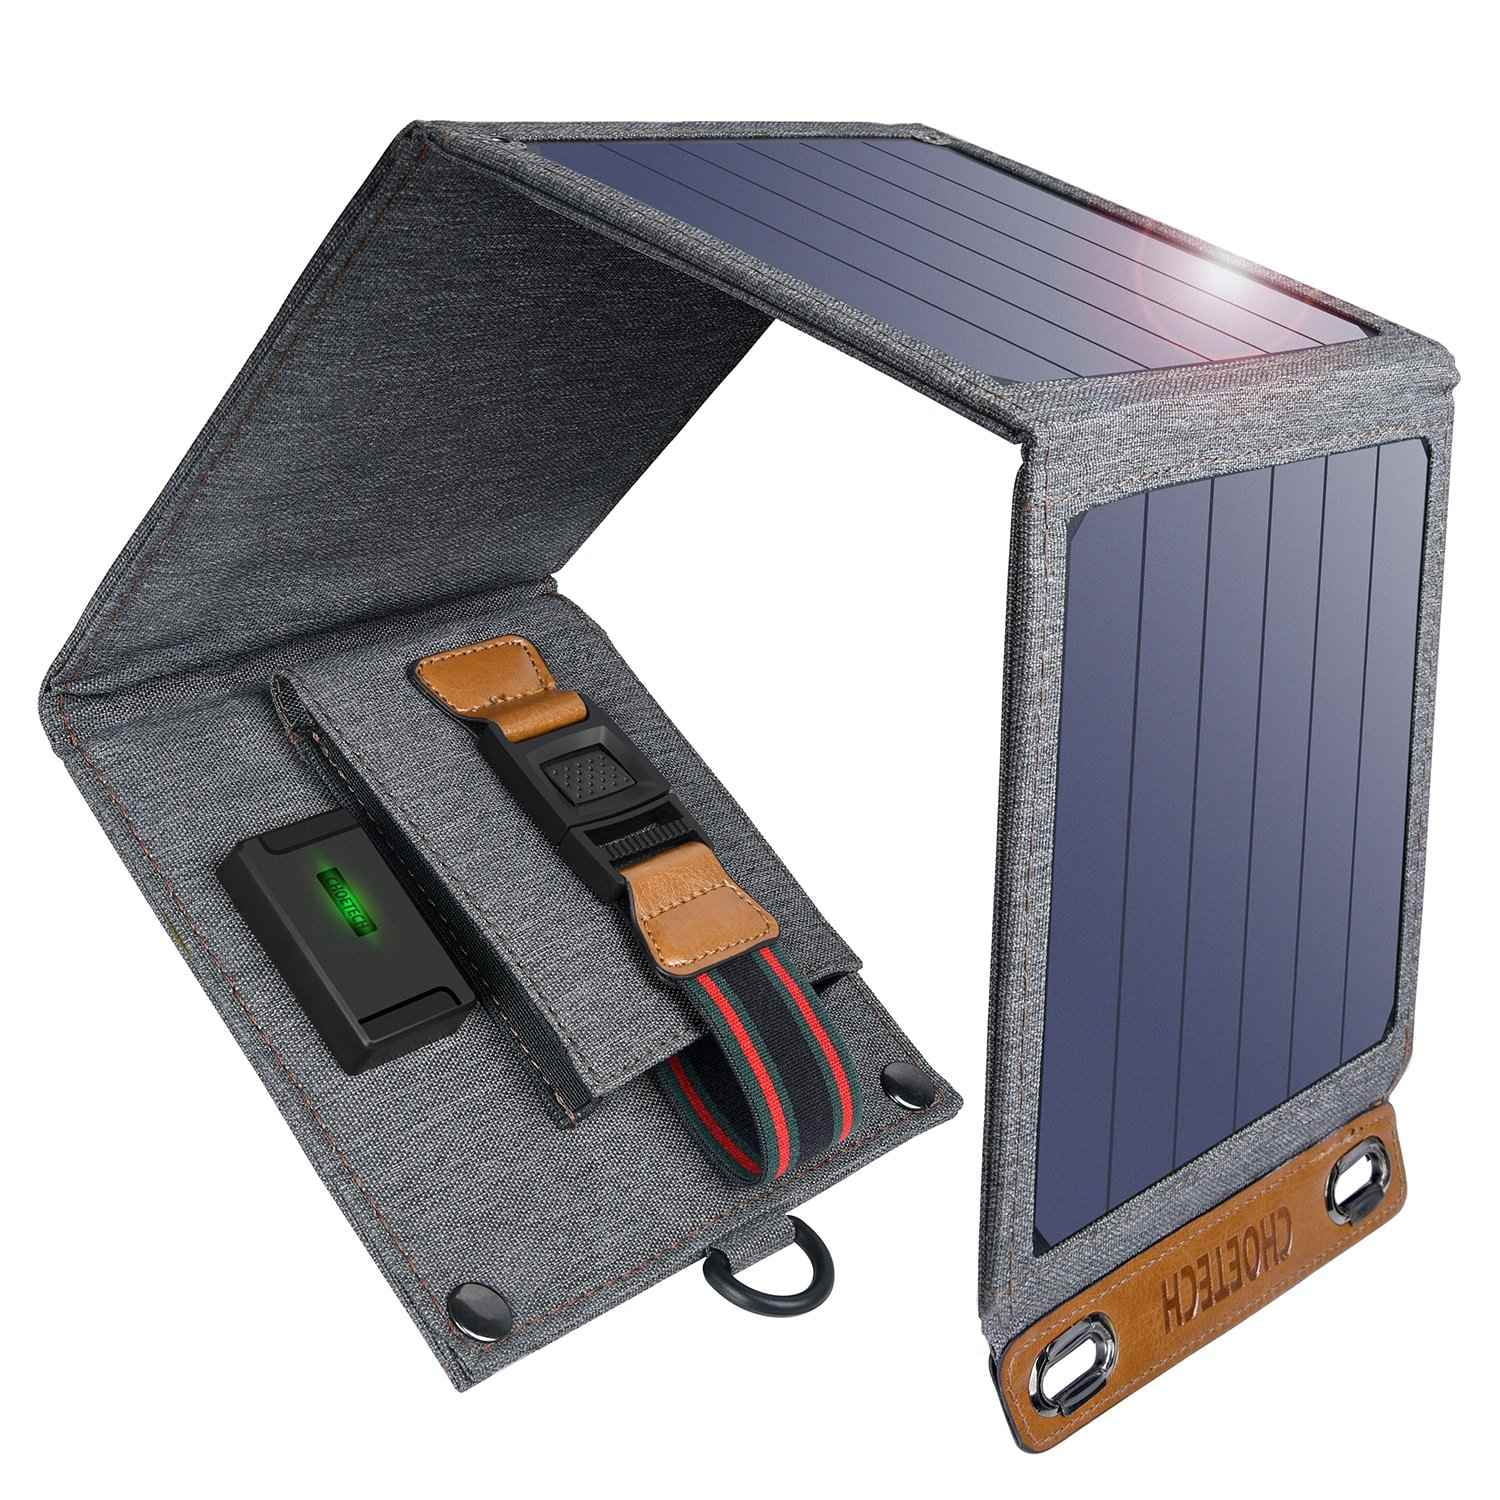 24W Solar Panel with 2 USB Ports Waterproof Foldable for Android iPhone Tablet 